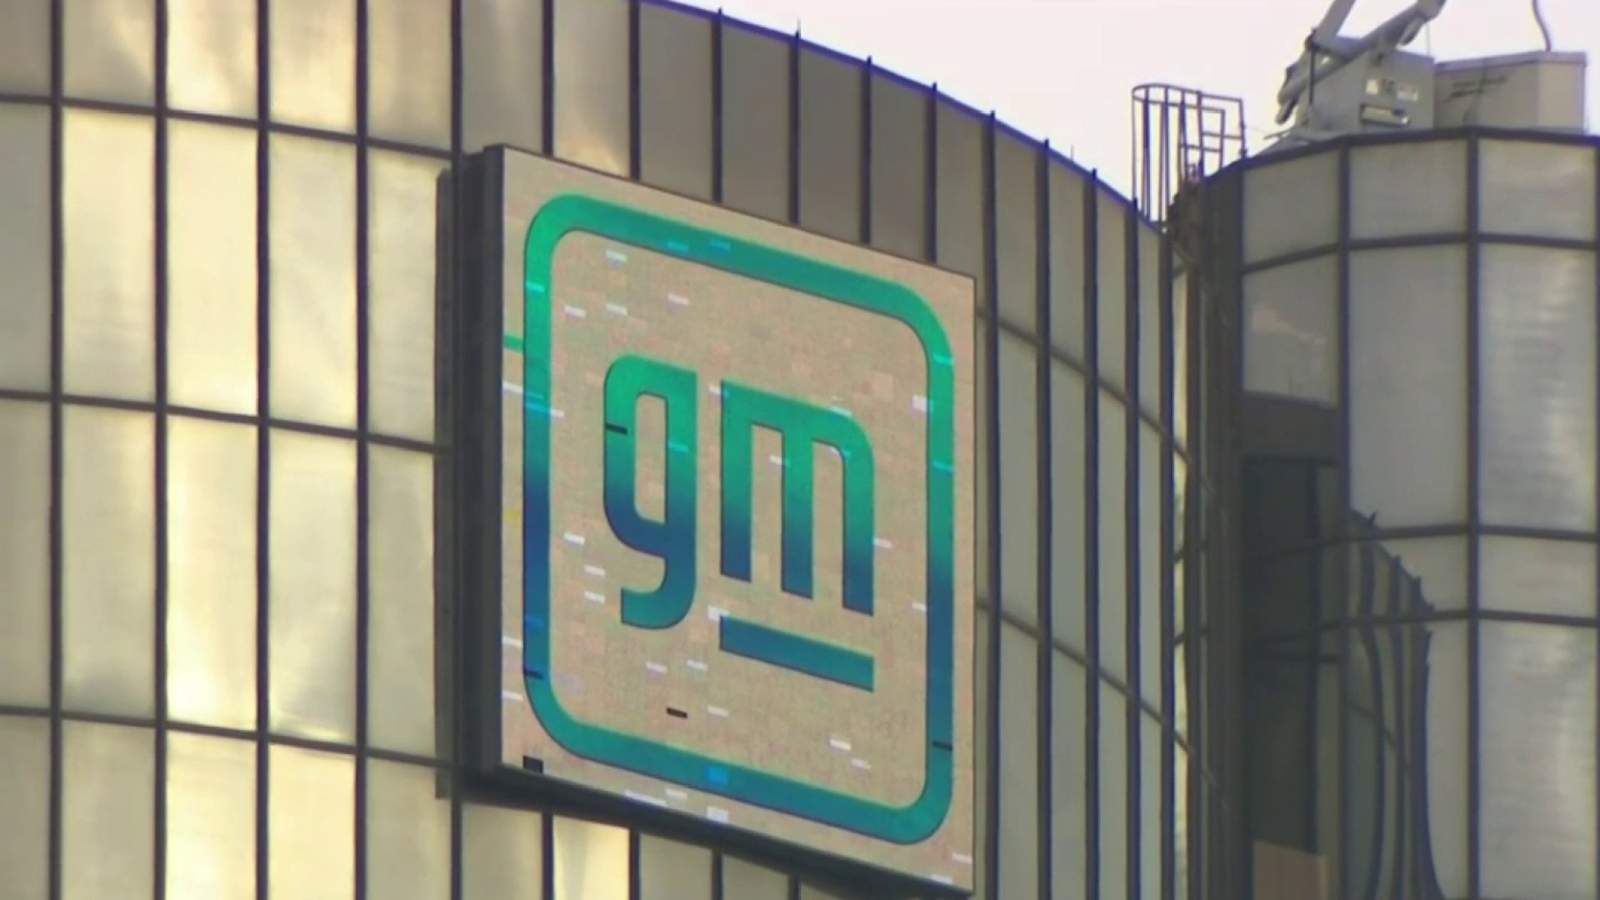 GM extends shutdowns at several plants due to semiconductor shortage